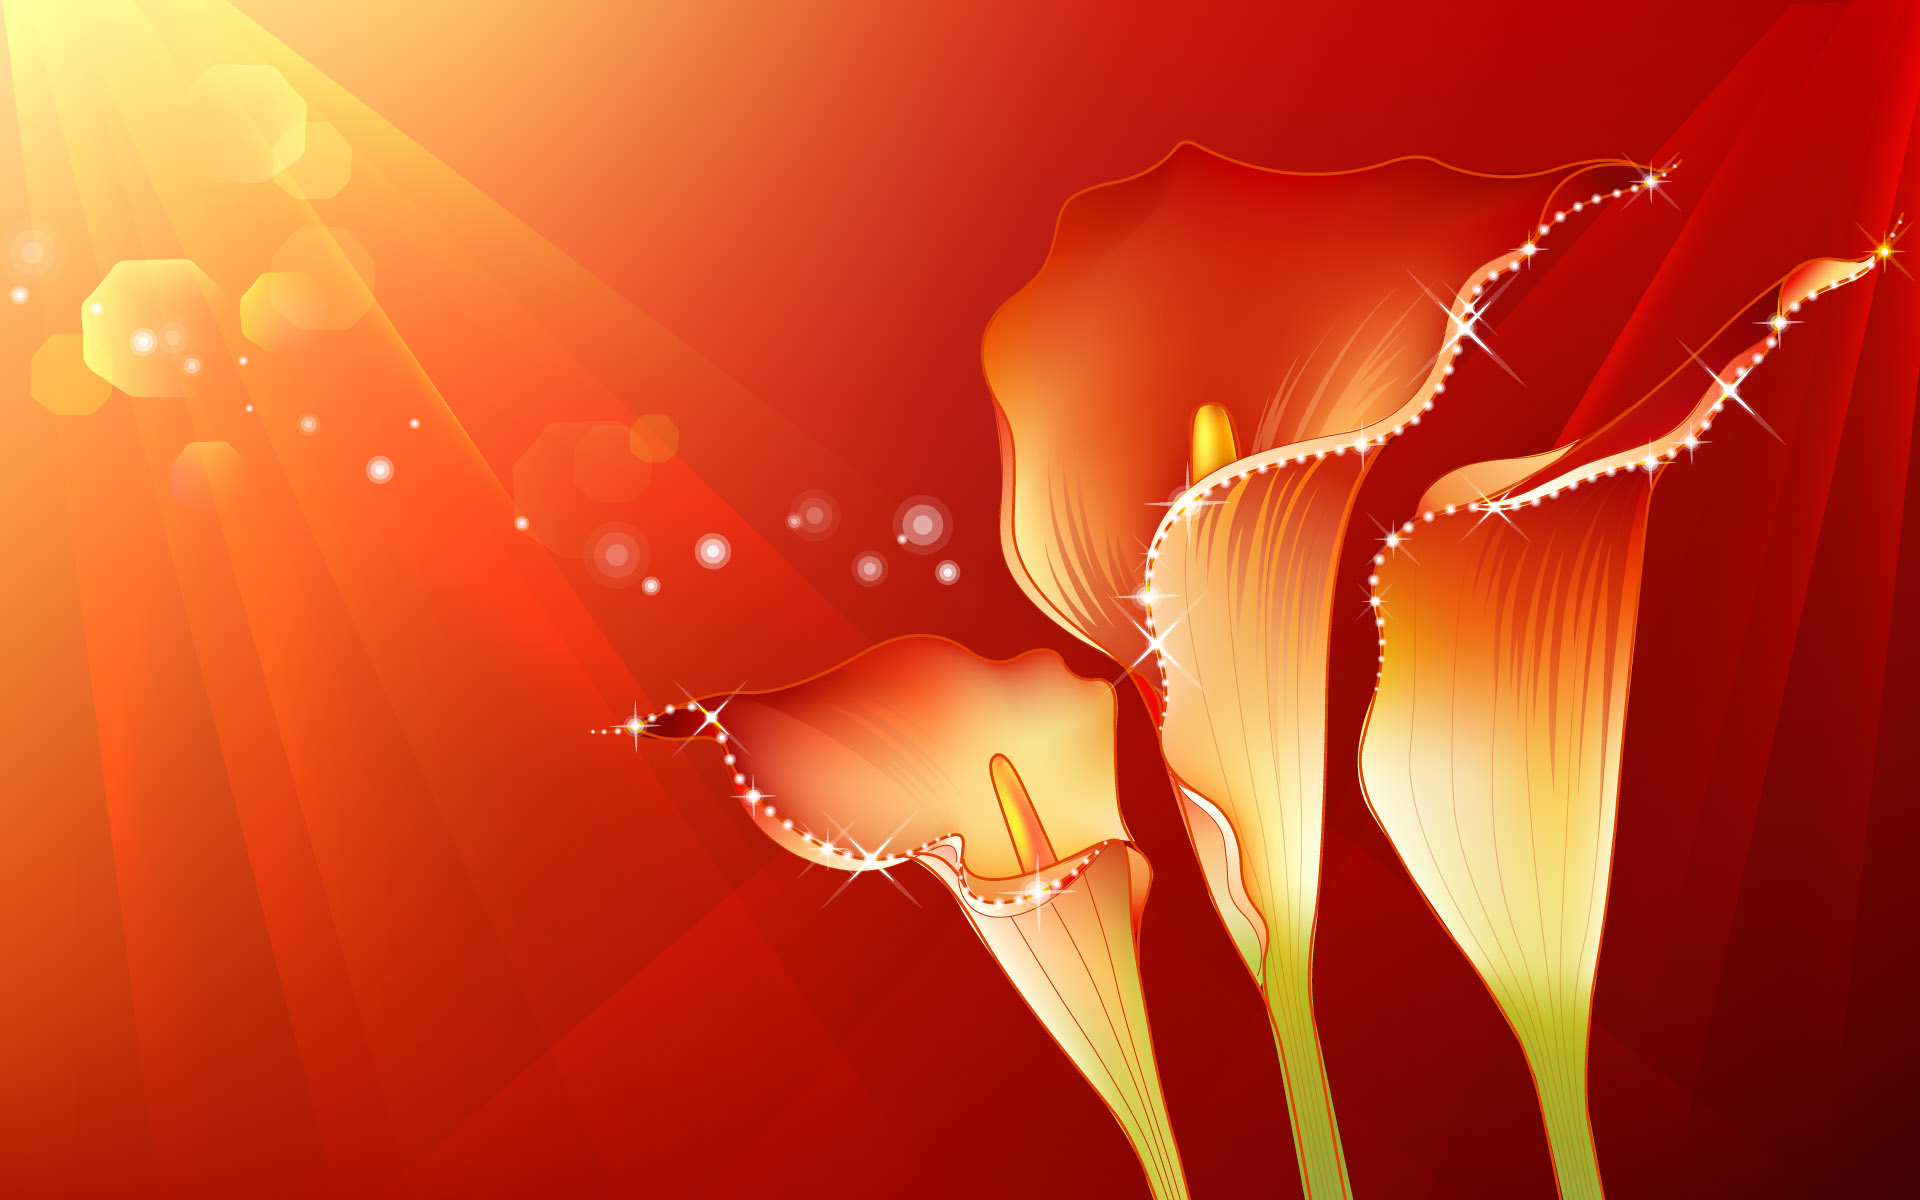 Abstract Flowers Design Wallpaper X Photo Of